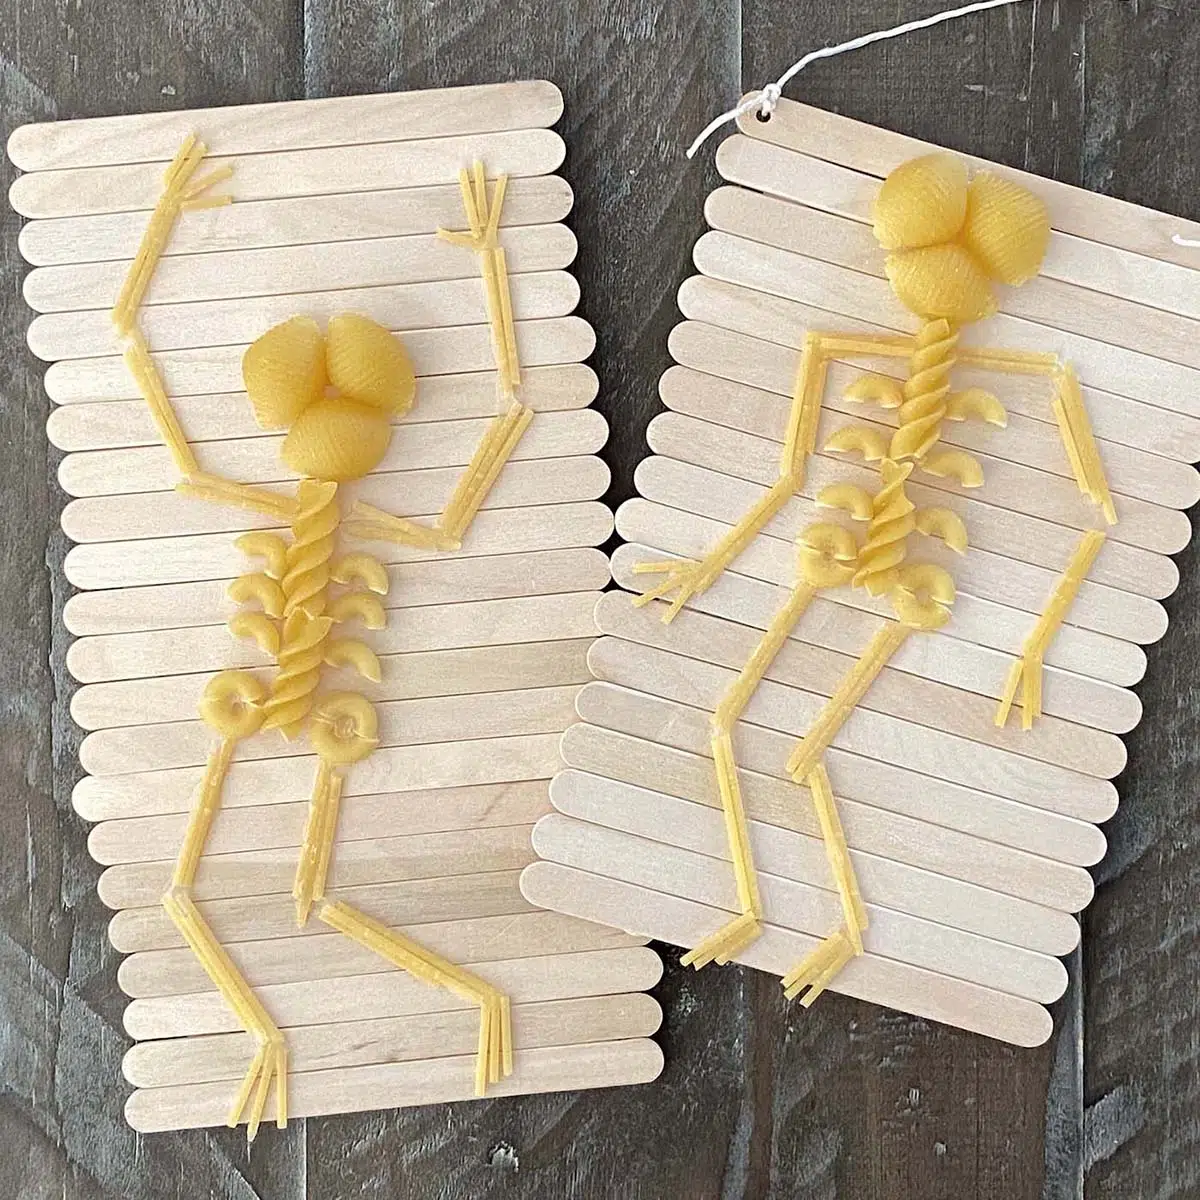 Halloween Crafts for Kids: How to Make a Pasta Skeleton Tutorial Video